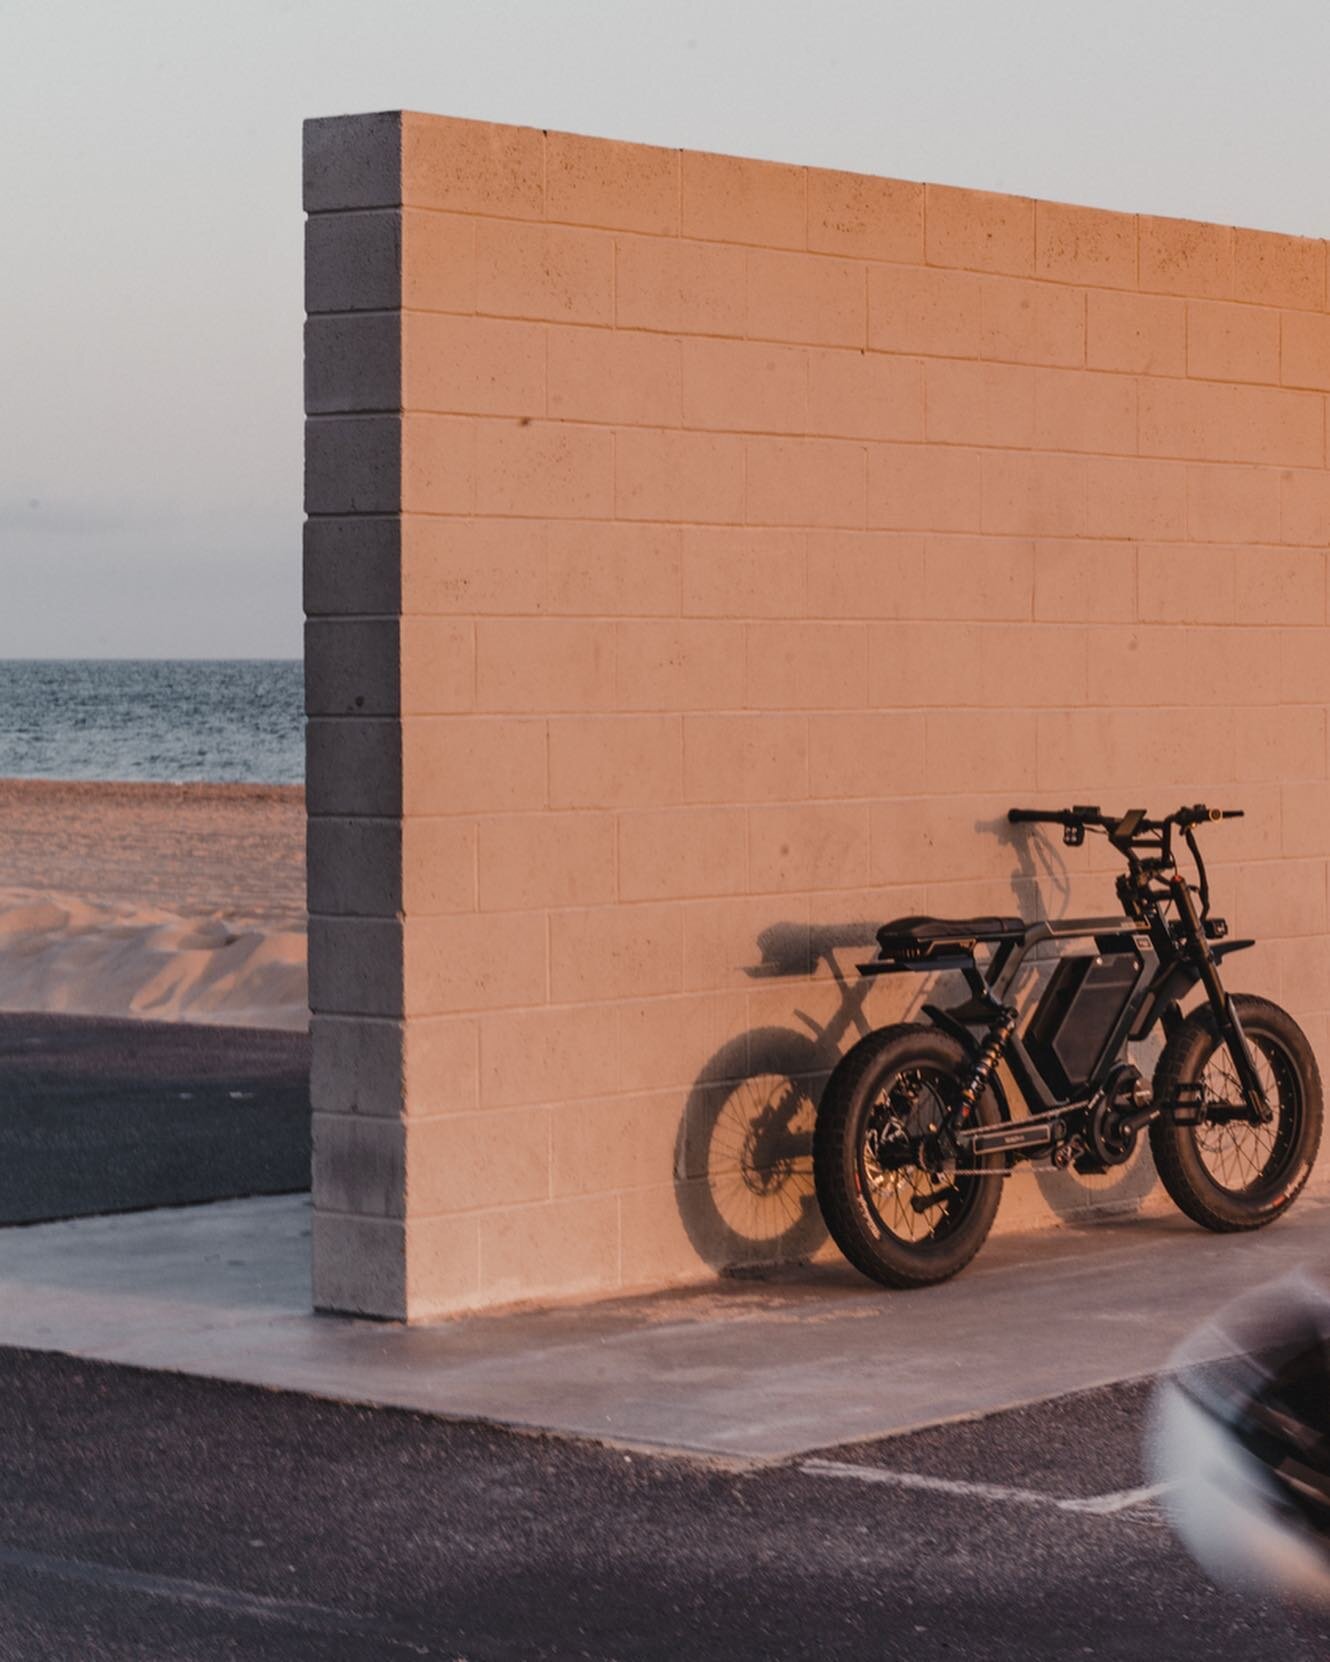 Beachside cruising in the new performance electric bike the Ristretto 512 First Edition